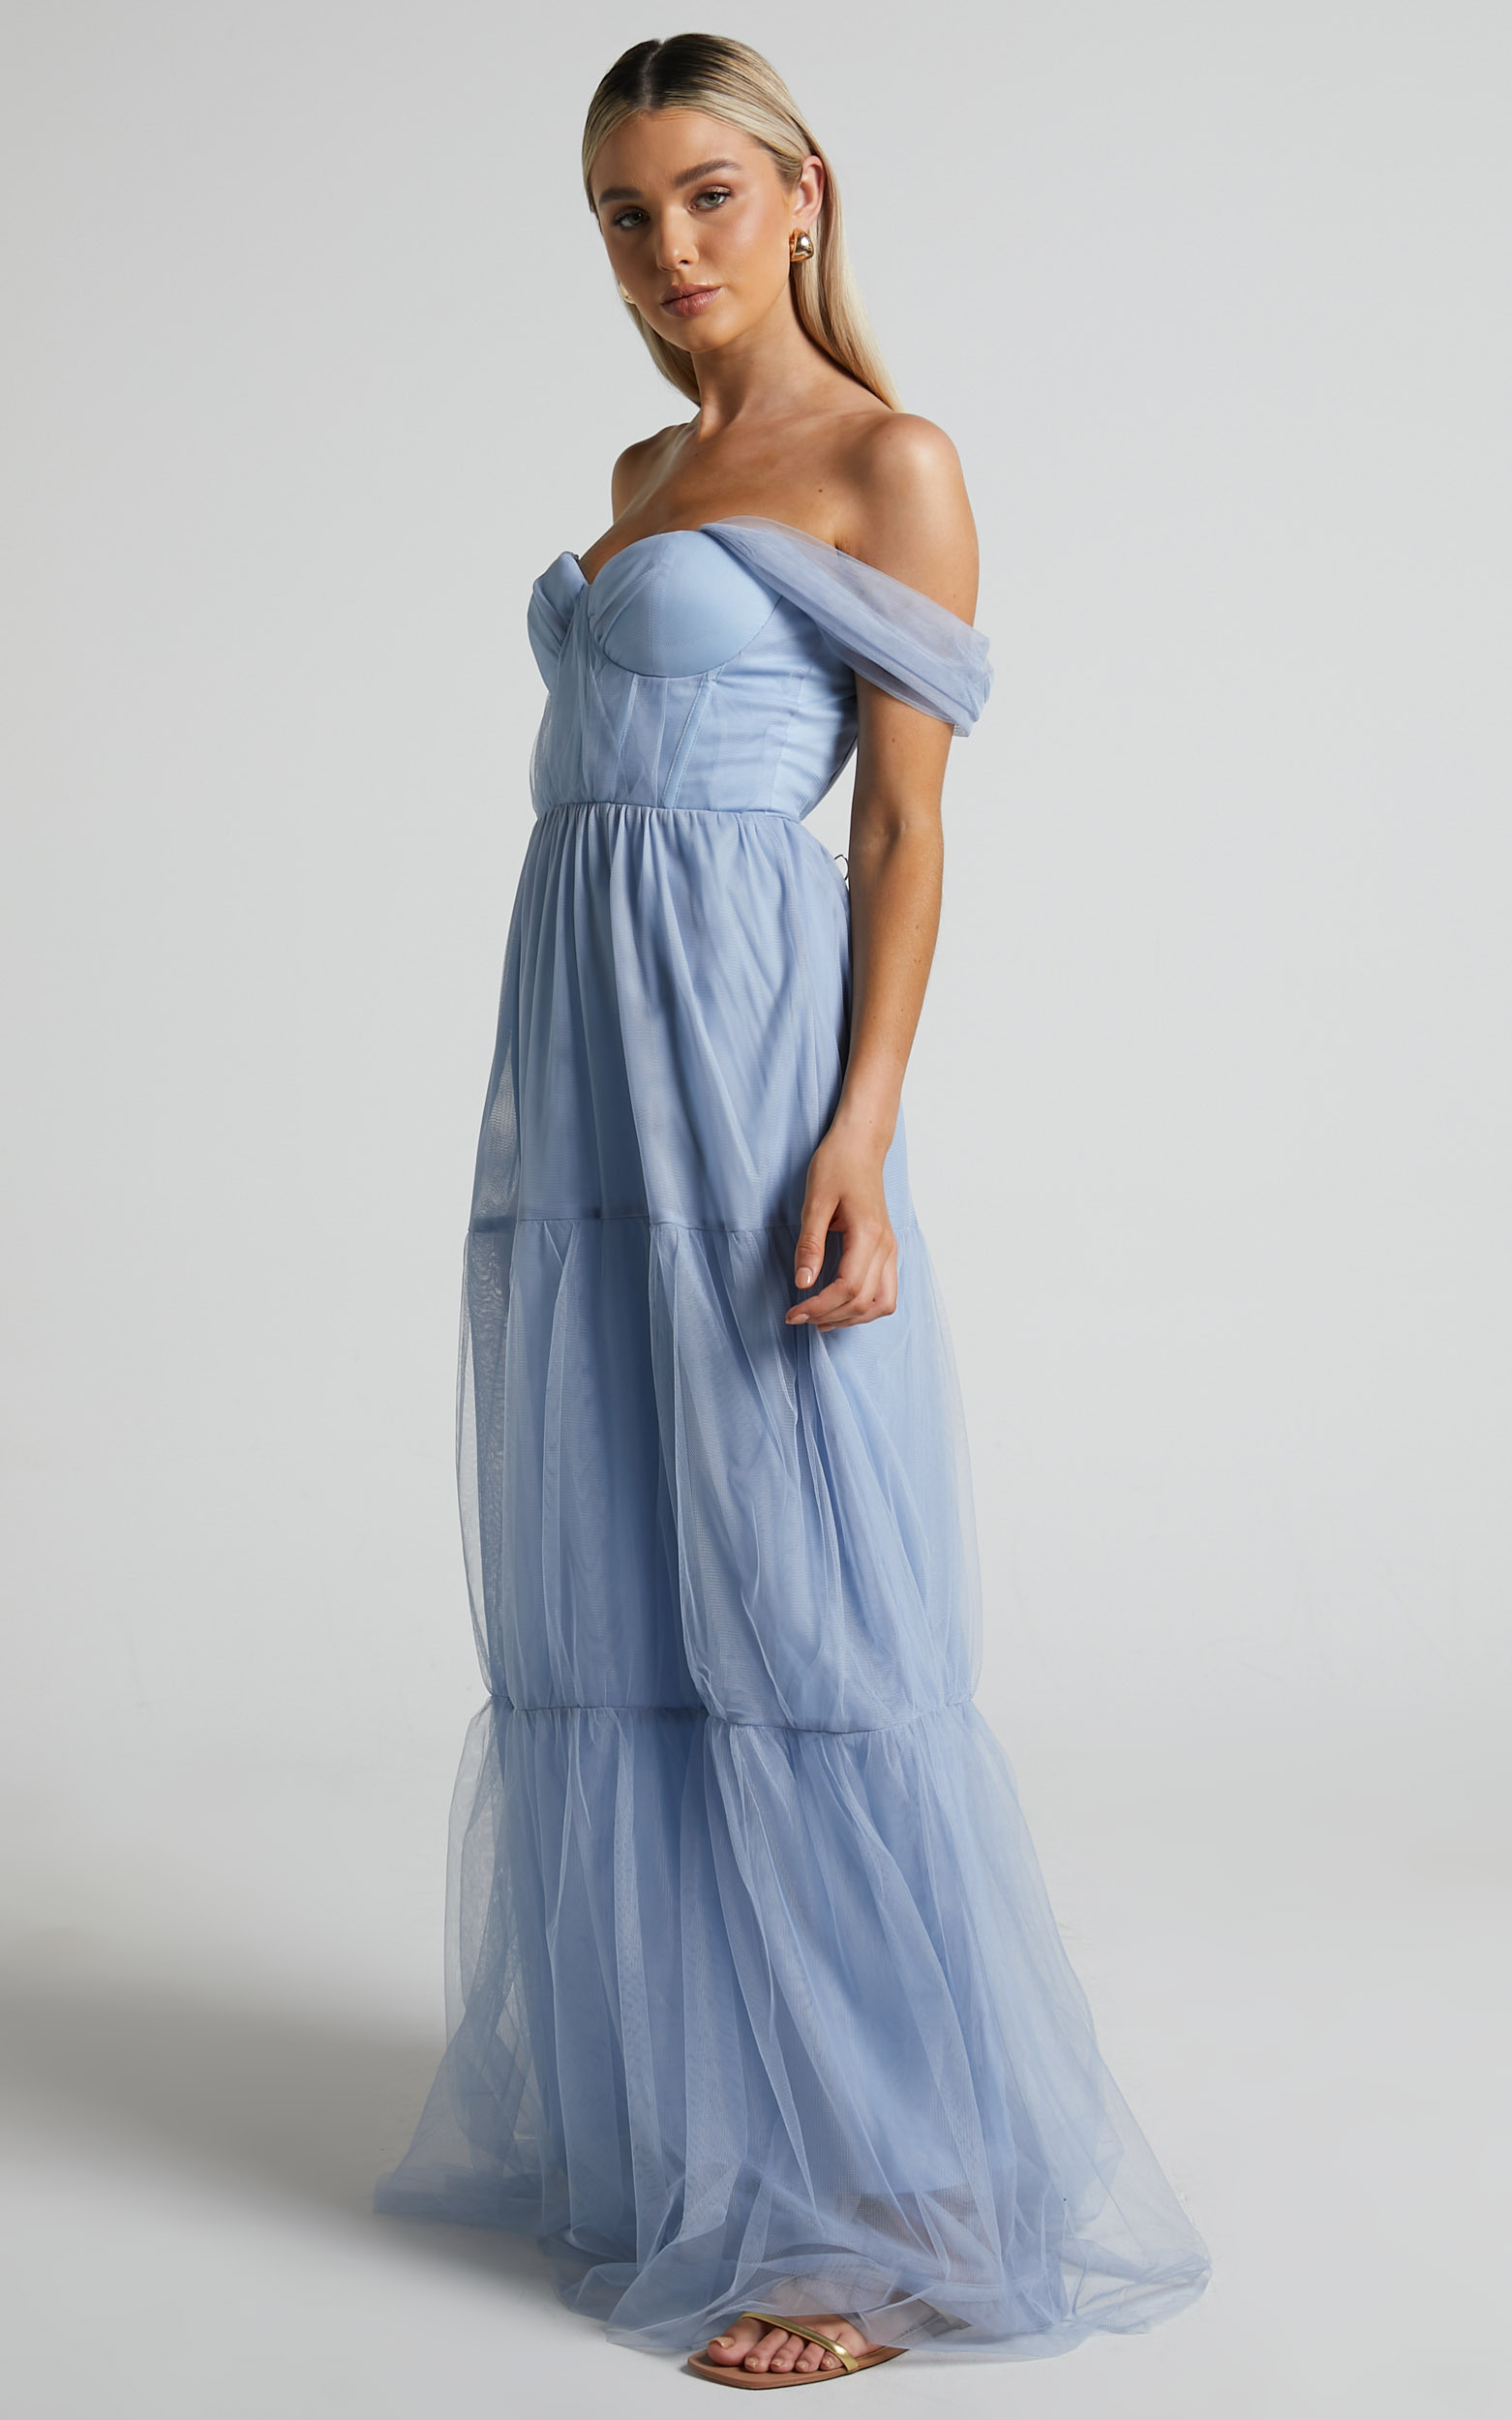 Ontario Maxi Dress - Off Shoulder Corset Bodice Tulle Dress in Light ...